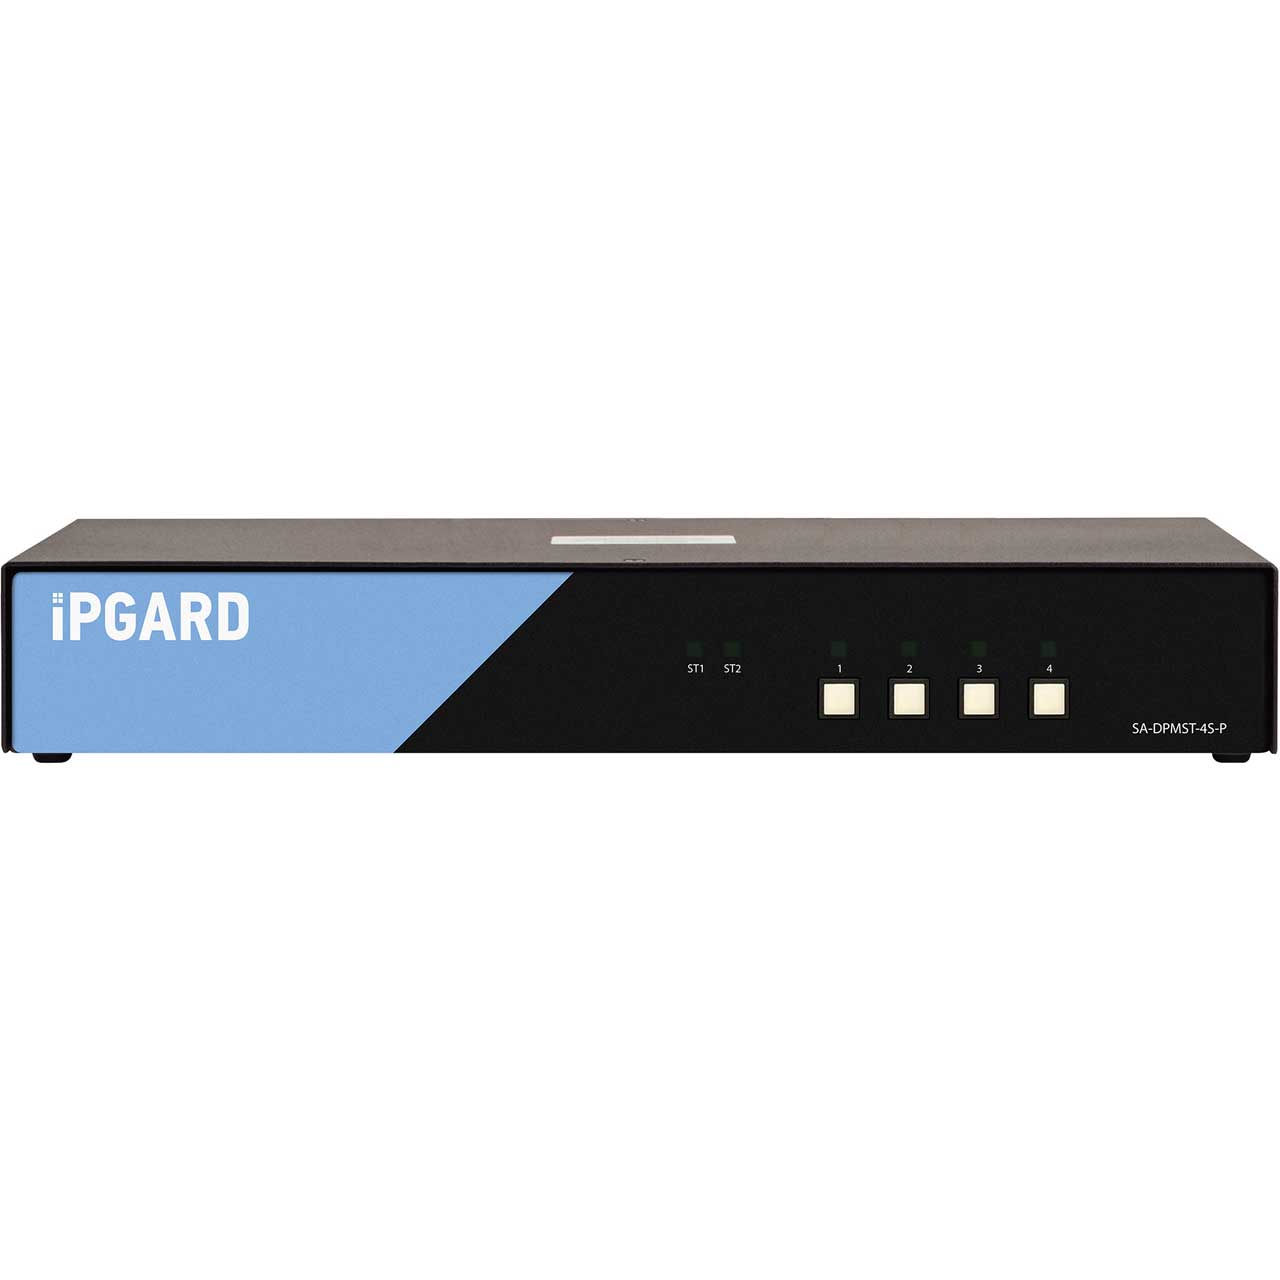 SmartAVI SA-DPMST-4S-P 4-Port SH DP to 2xHDMI Secure KVM with Audio and CAC SA-DPMST-4S-P